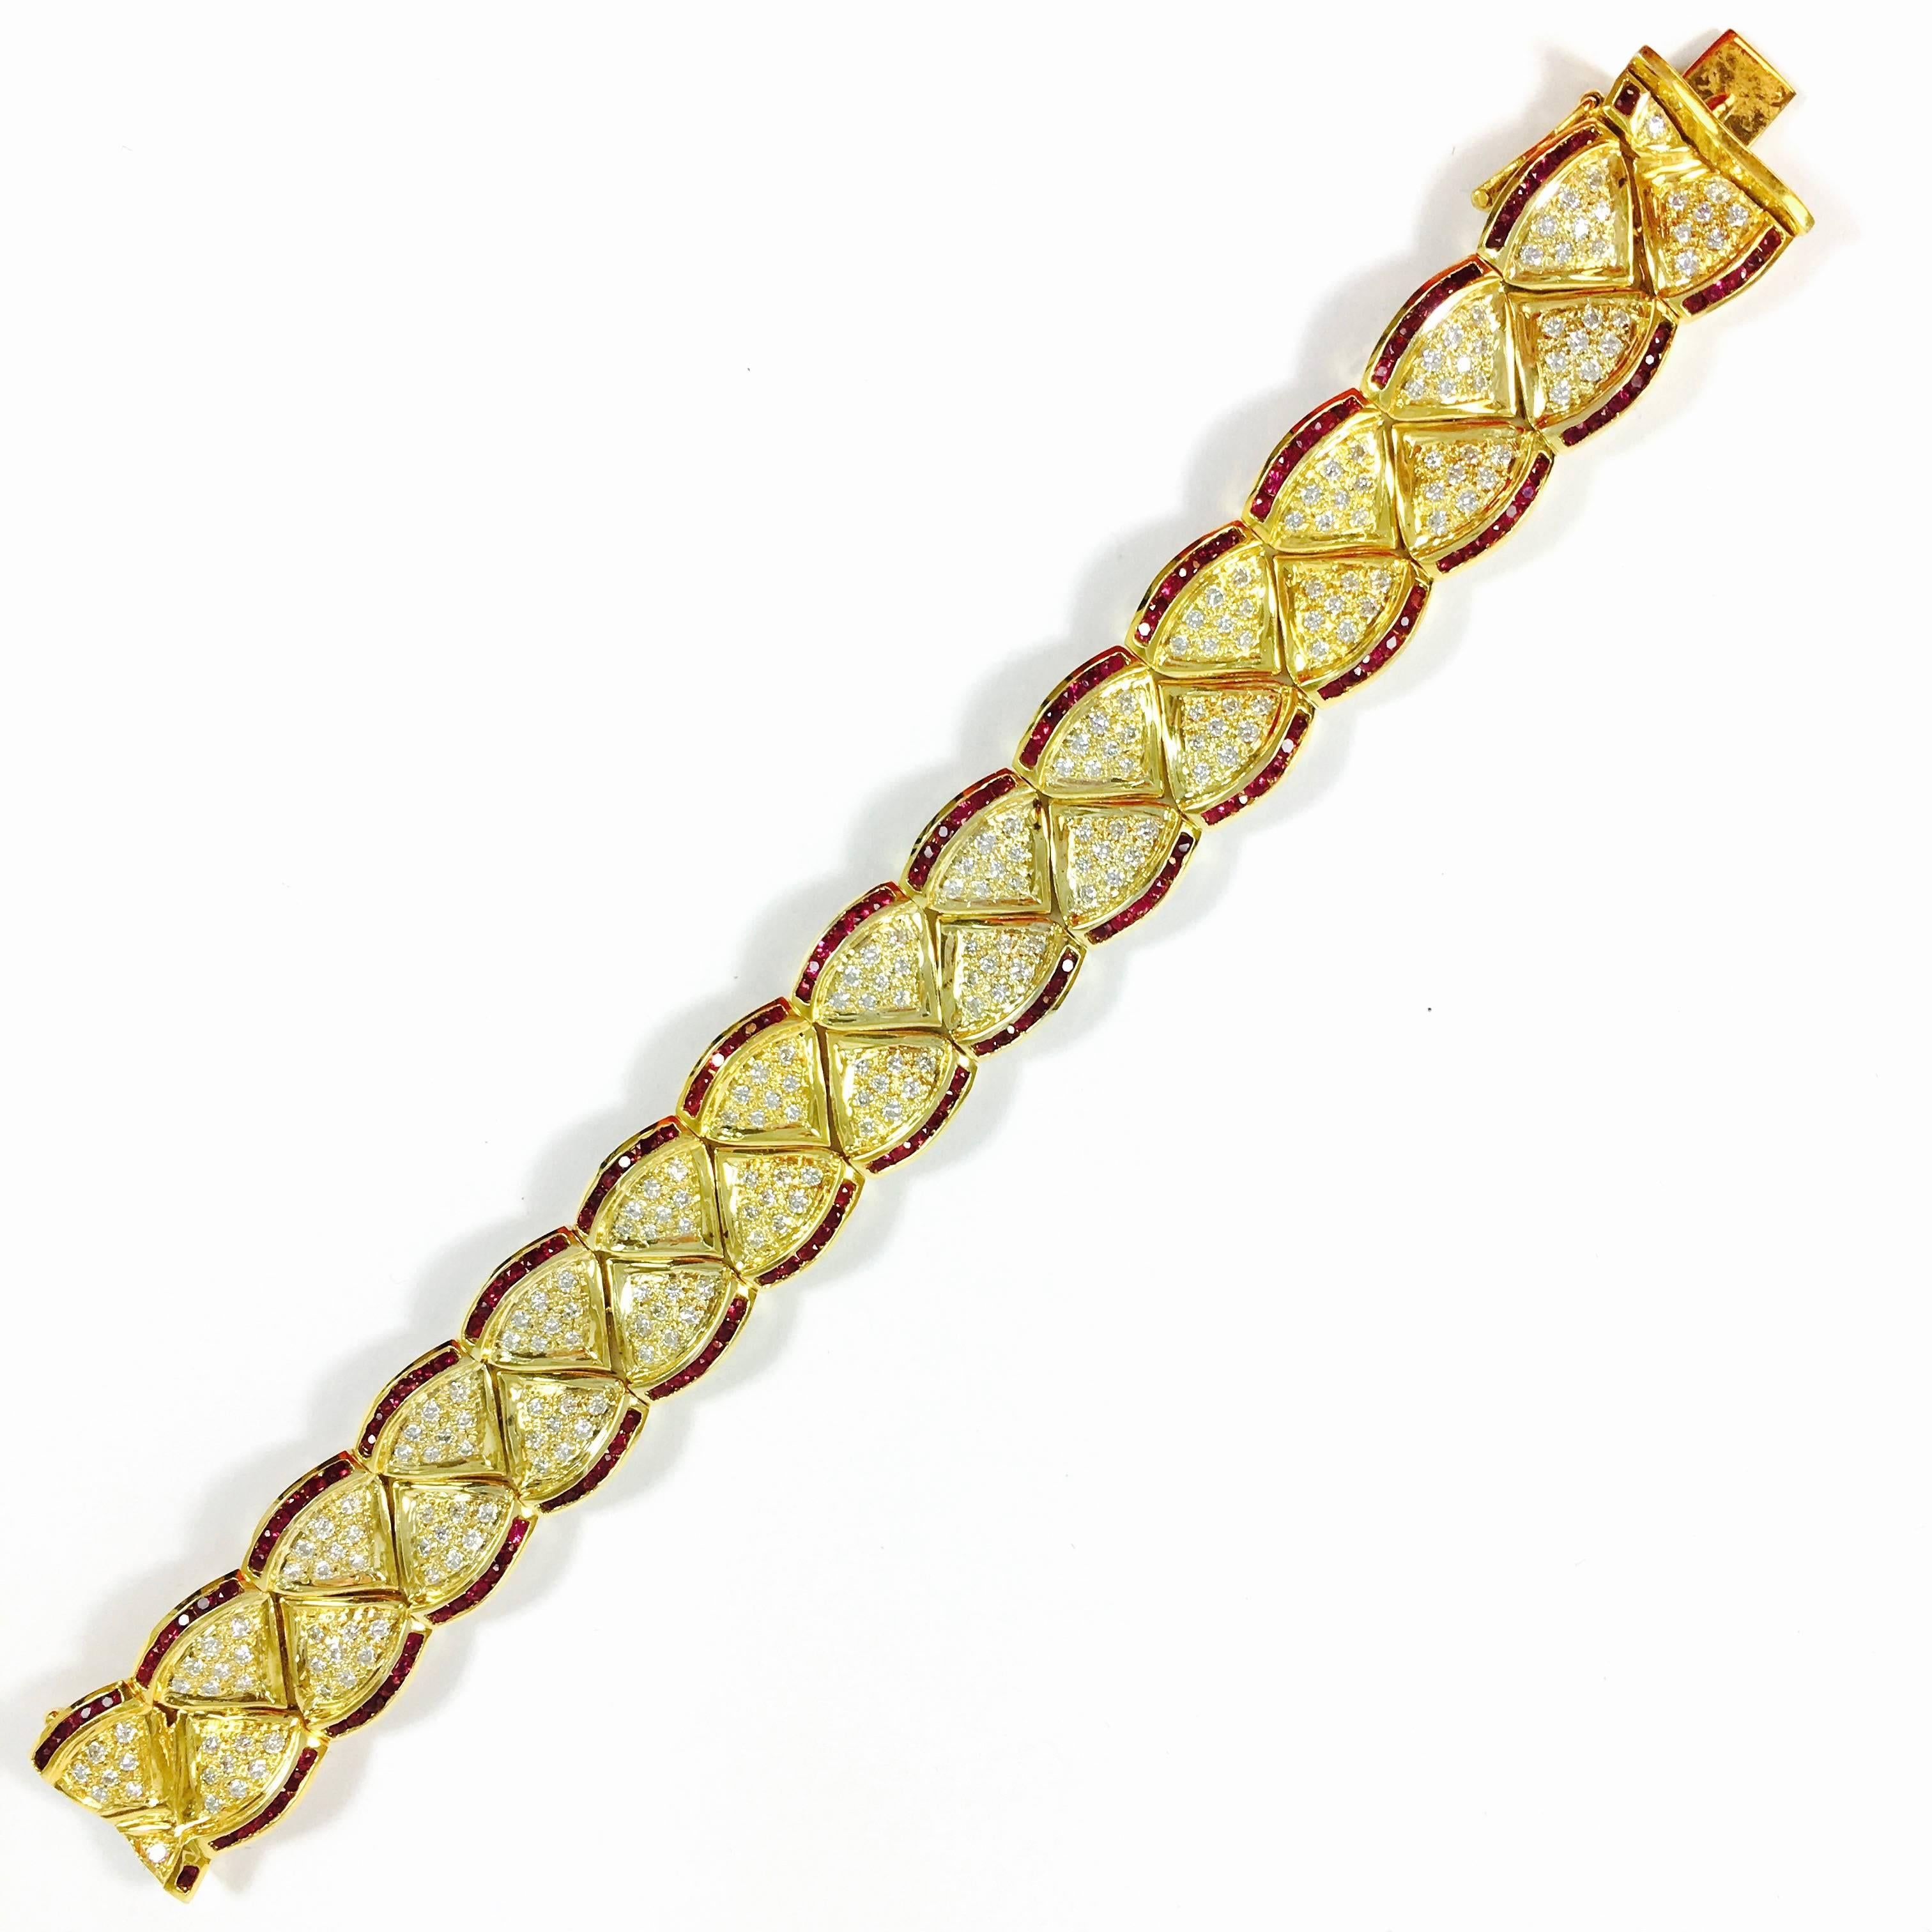 8 Carats Diamonds 5.5 Carats Rubies Scalloped Gold Bracelet In Excellent Condition For Sale In Agoura Hills, CA